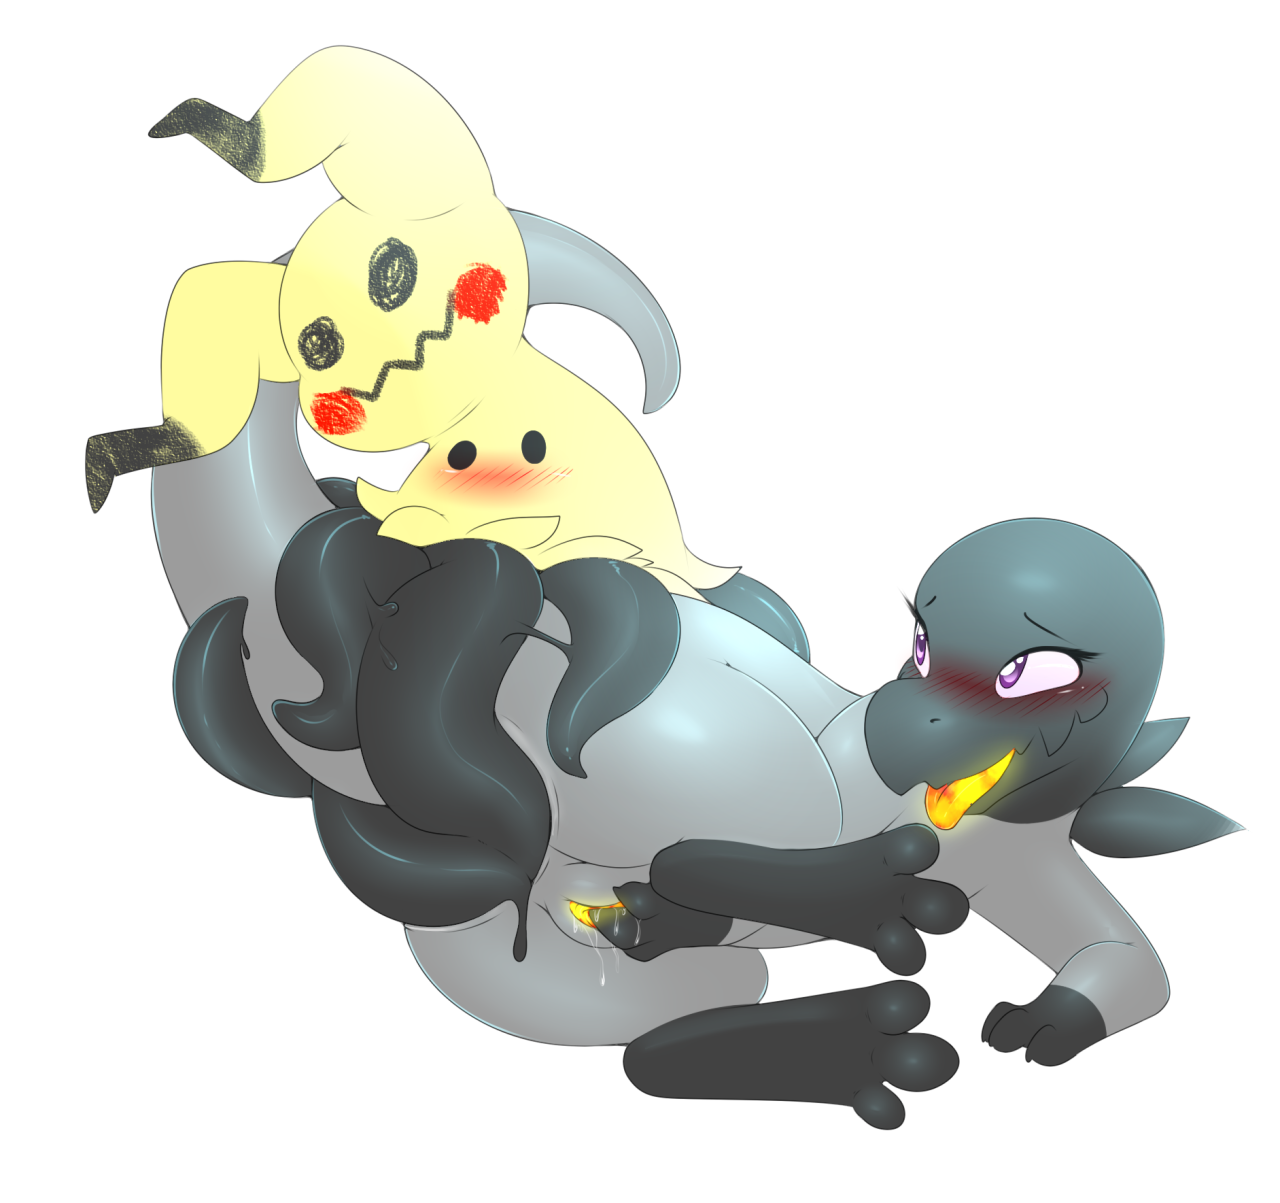 My new canon about mimikyuu being nothing but a black mass of tentacle goo under